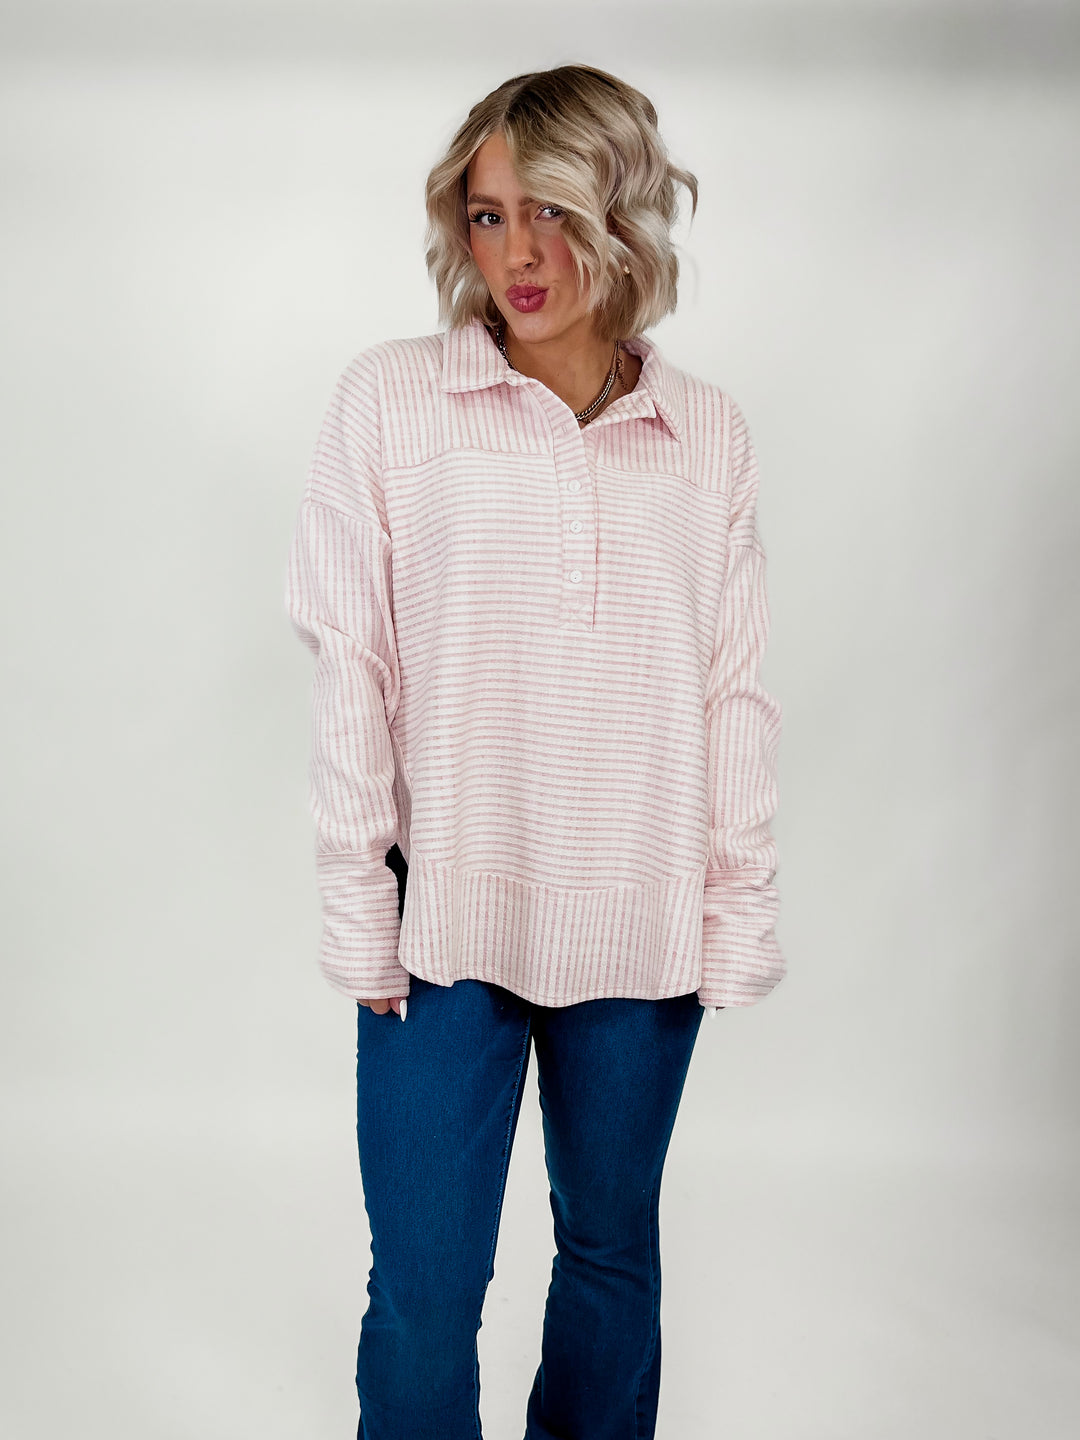 Heart Strings Striped Ribbed Collared Top, Pink